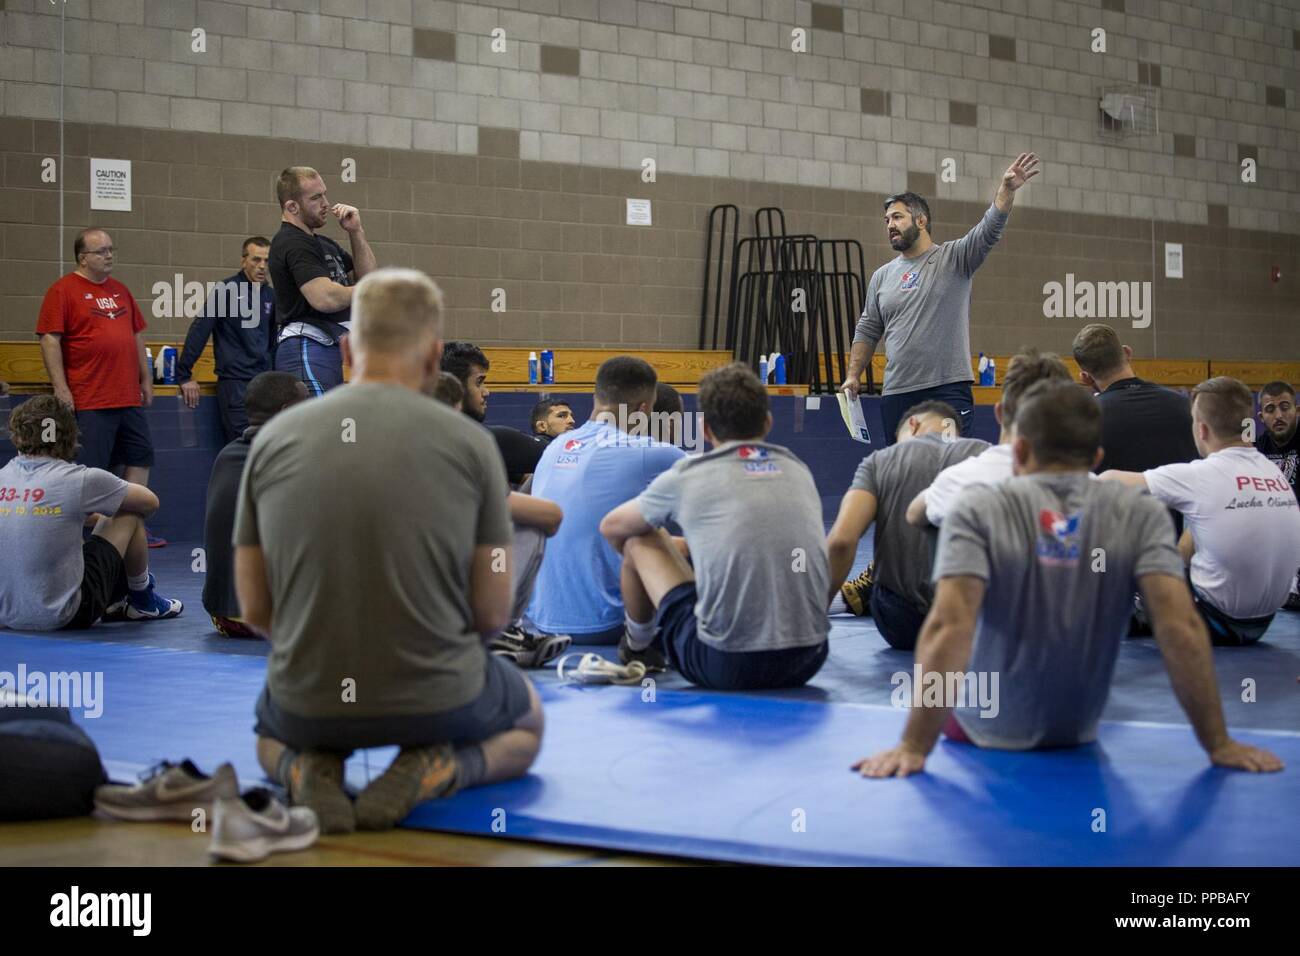 Bill Zadick, right, USA Wrestling’s National Freestyle coach, USA Wrestling Men’s Freestyle World Team Training Camp, speaks to the wrestlers prior to practice at the 43 Fitness Center at Marine Corps Base Camp Pendleton, California, Aug. 20, 2018.  During his first year of coaching, Zadick successfully led his team to the World Team Title at the World Championships in 2017. Stock Photo